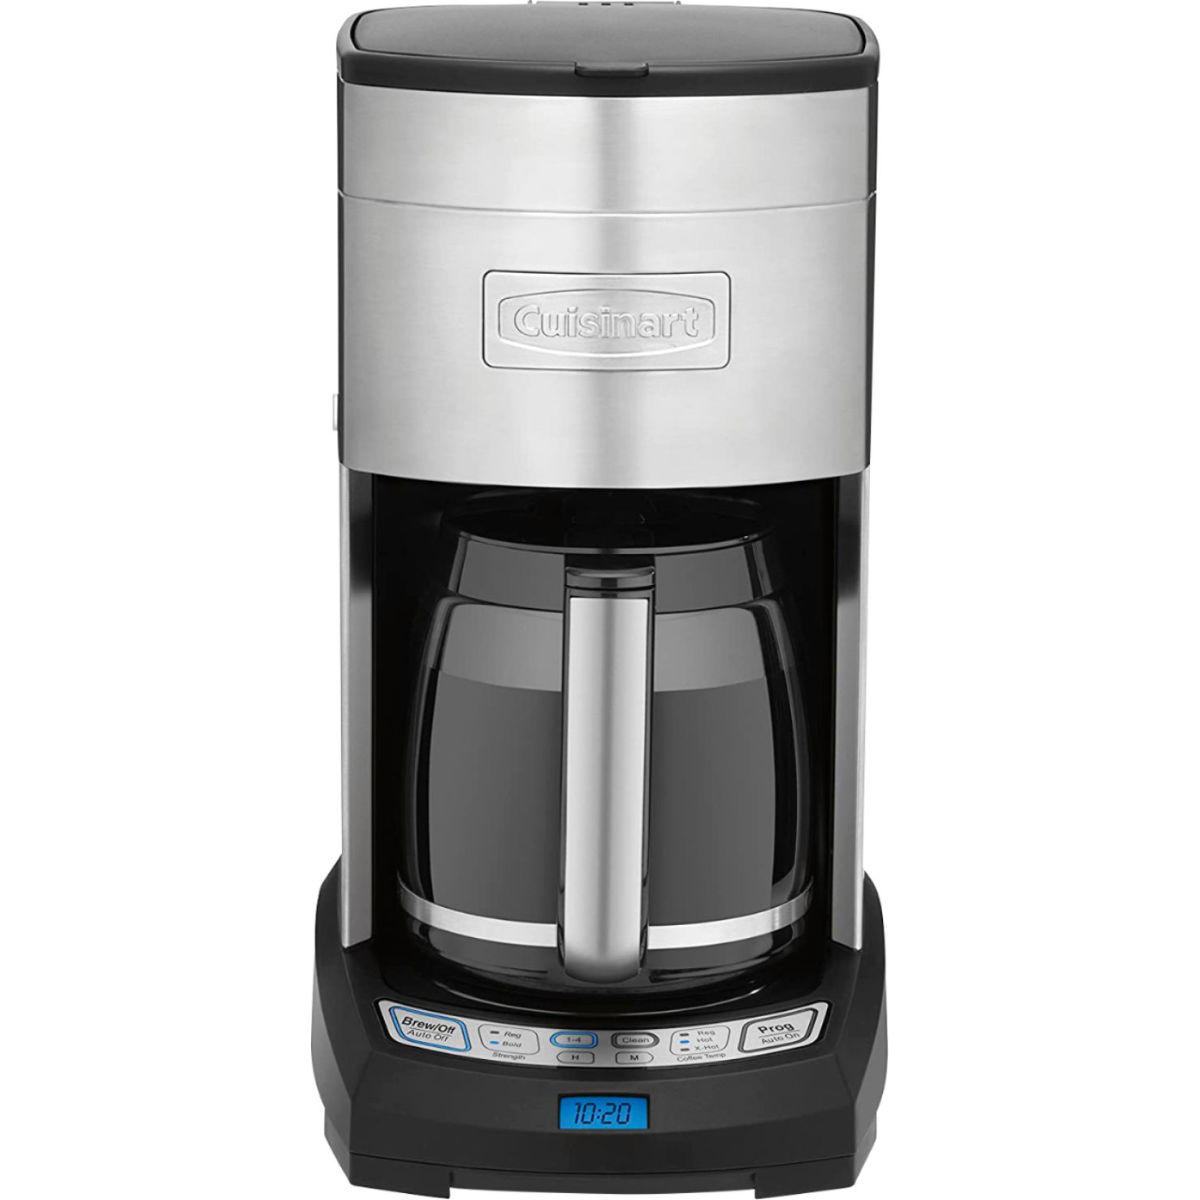 Cuisinart DCC-3650 12-Cup Coffee Maker